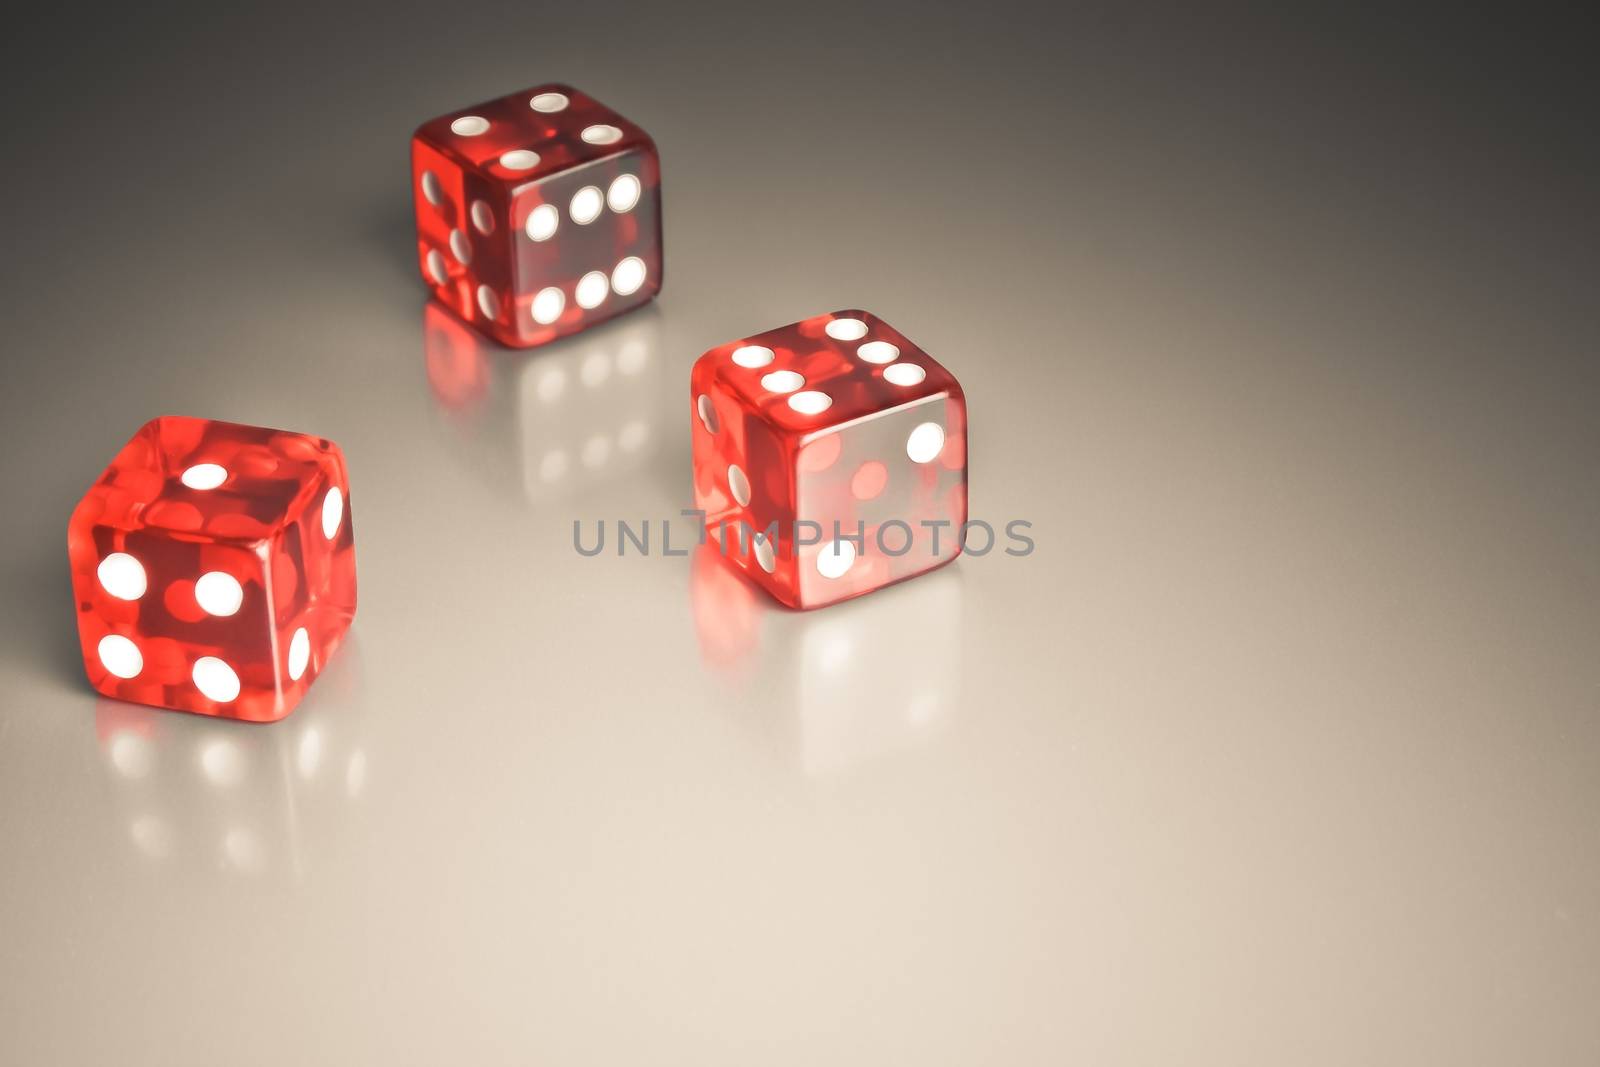 detail of red dice on a smooth surface